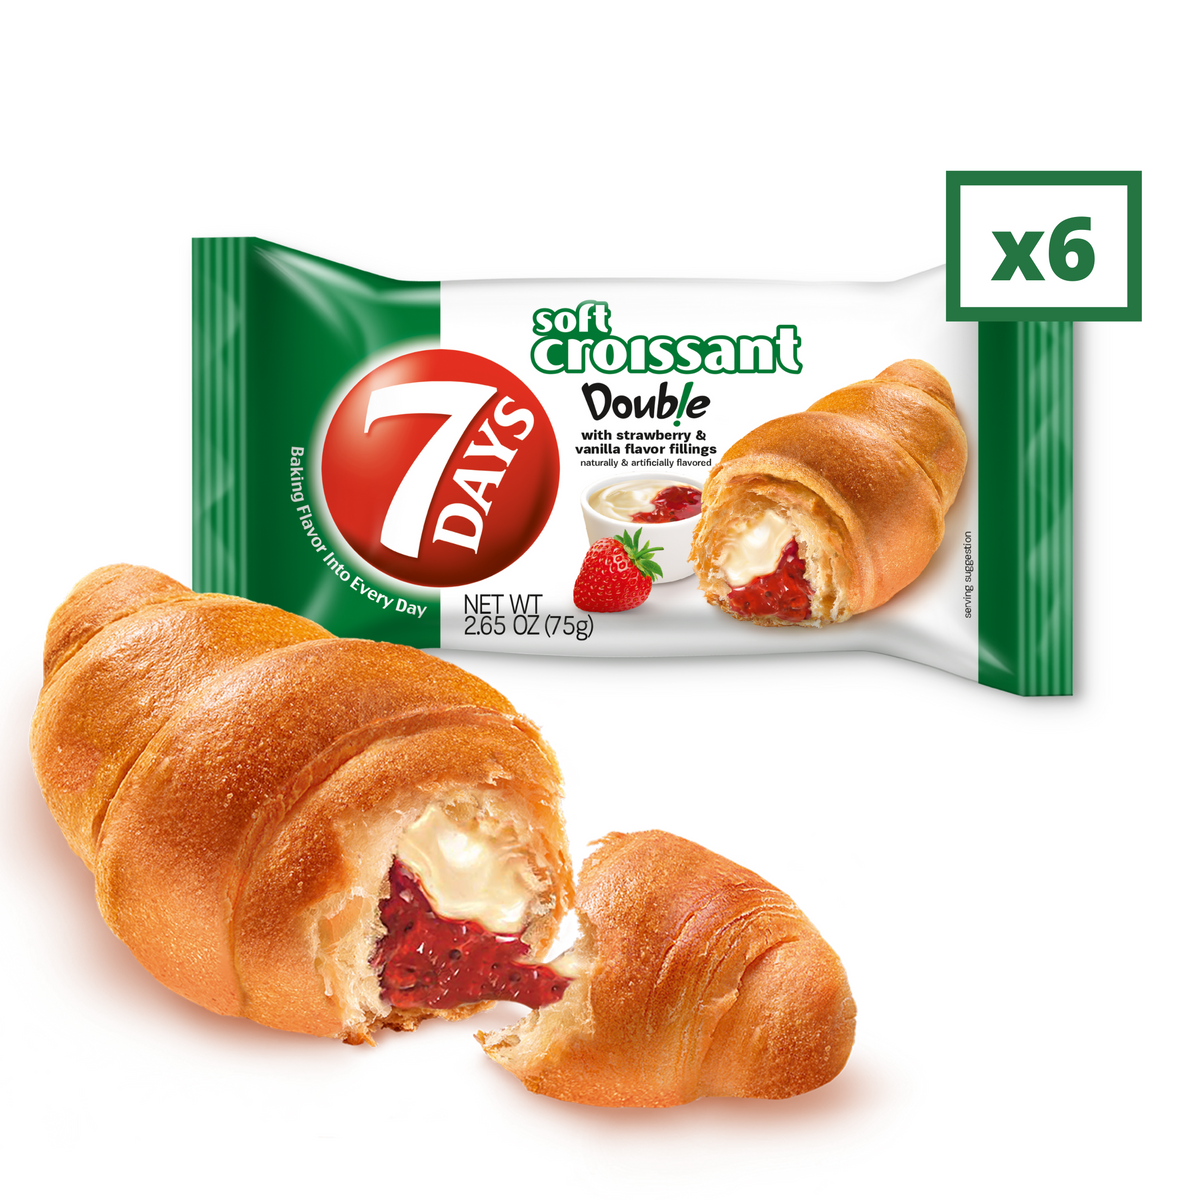 strawberry croissants times 6